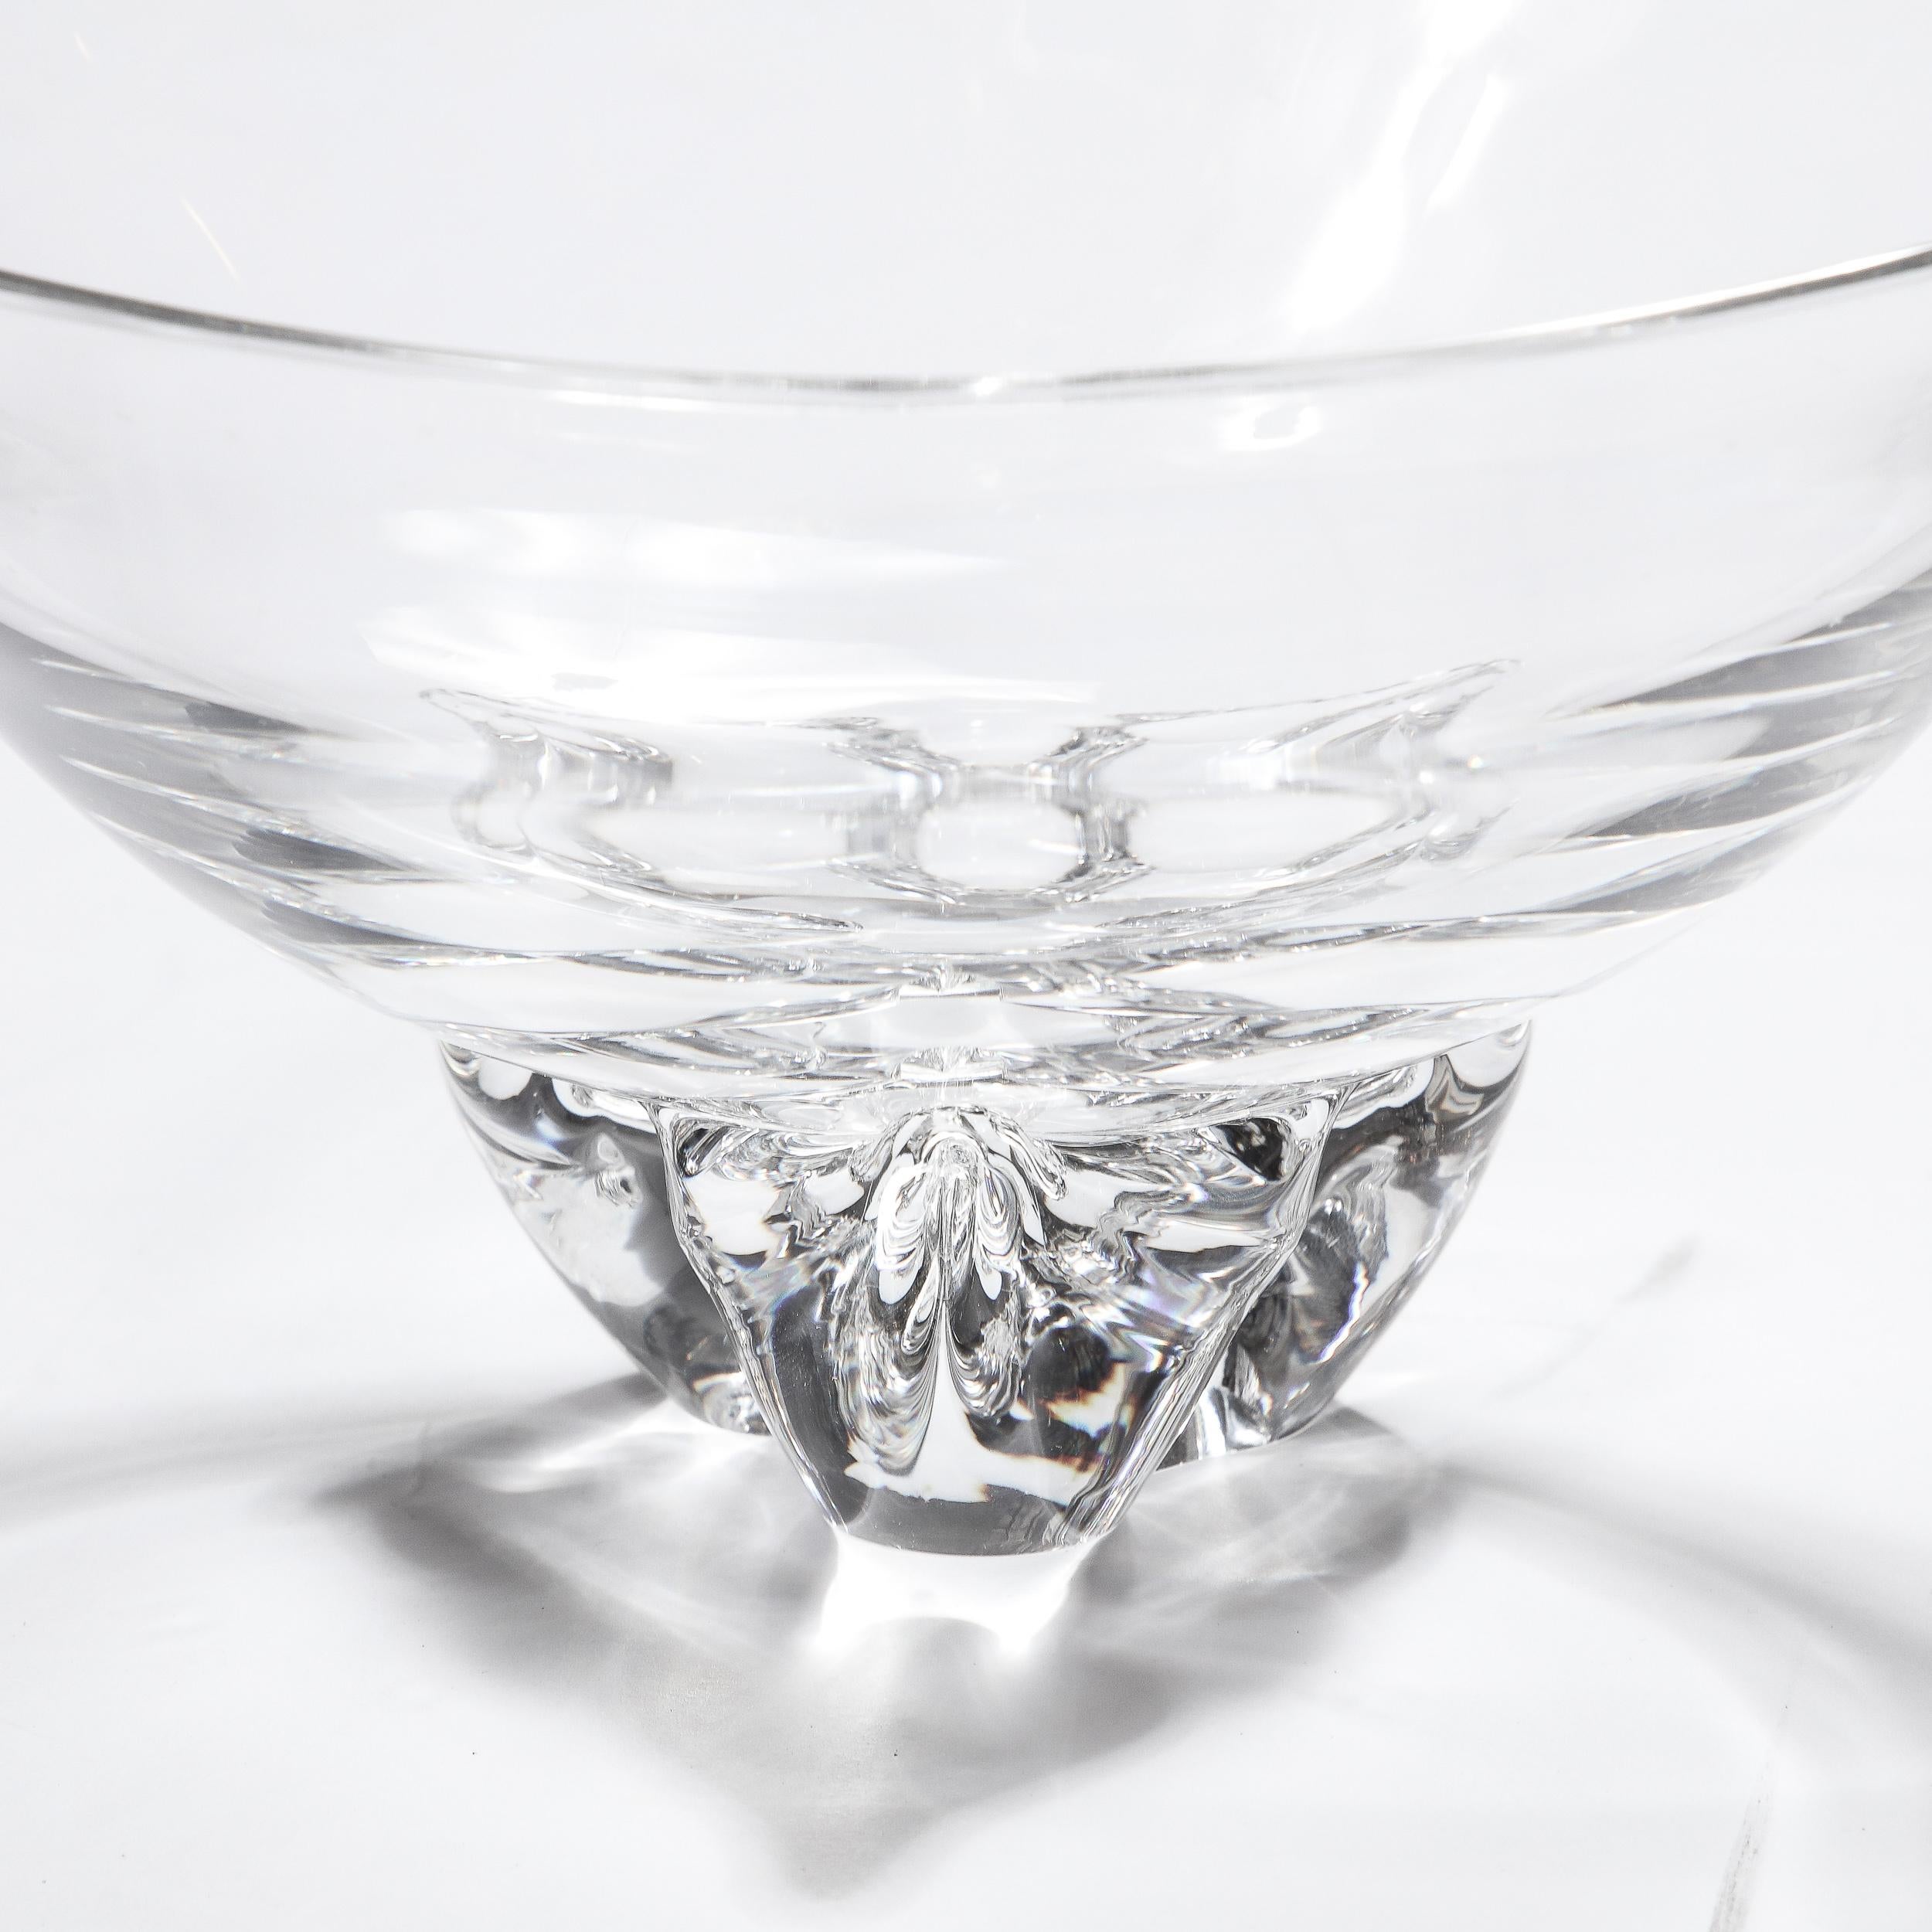 American Mid-Century Modernist Hand-Blown Glass Bowl with Organic Base Signed Steuben For Sale